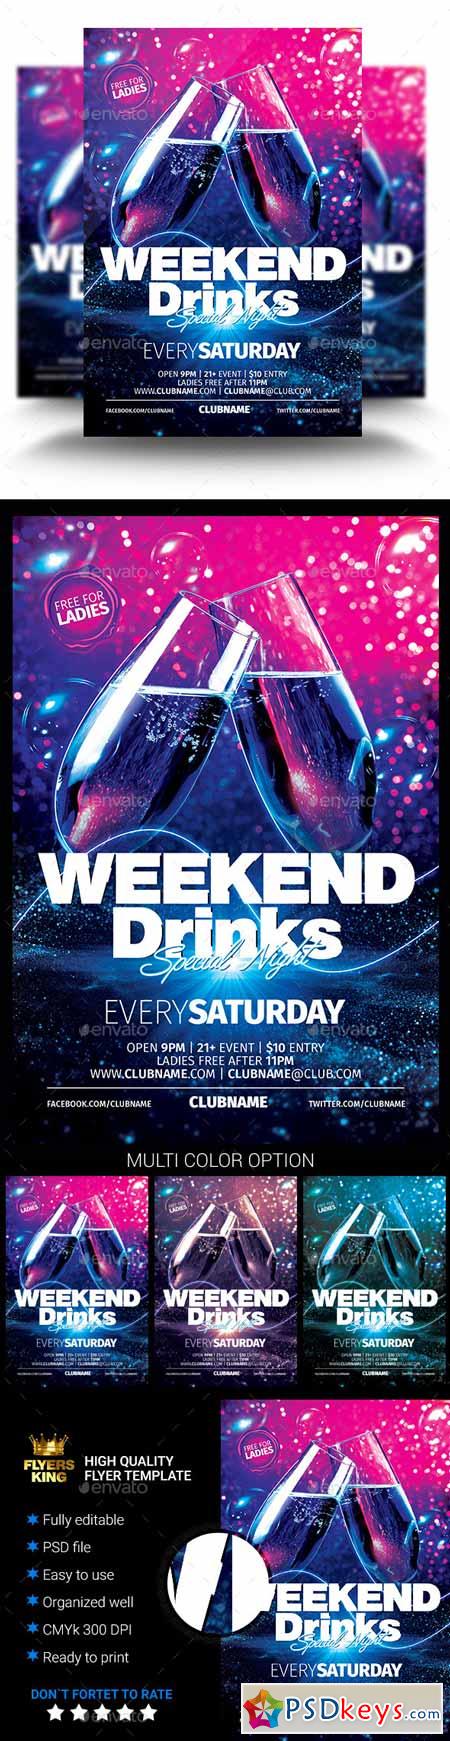 Weekend Drinks Party Flyer 11218406